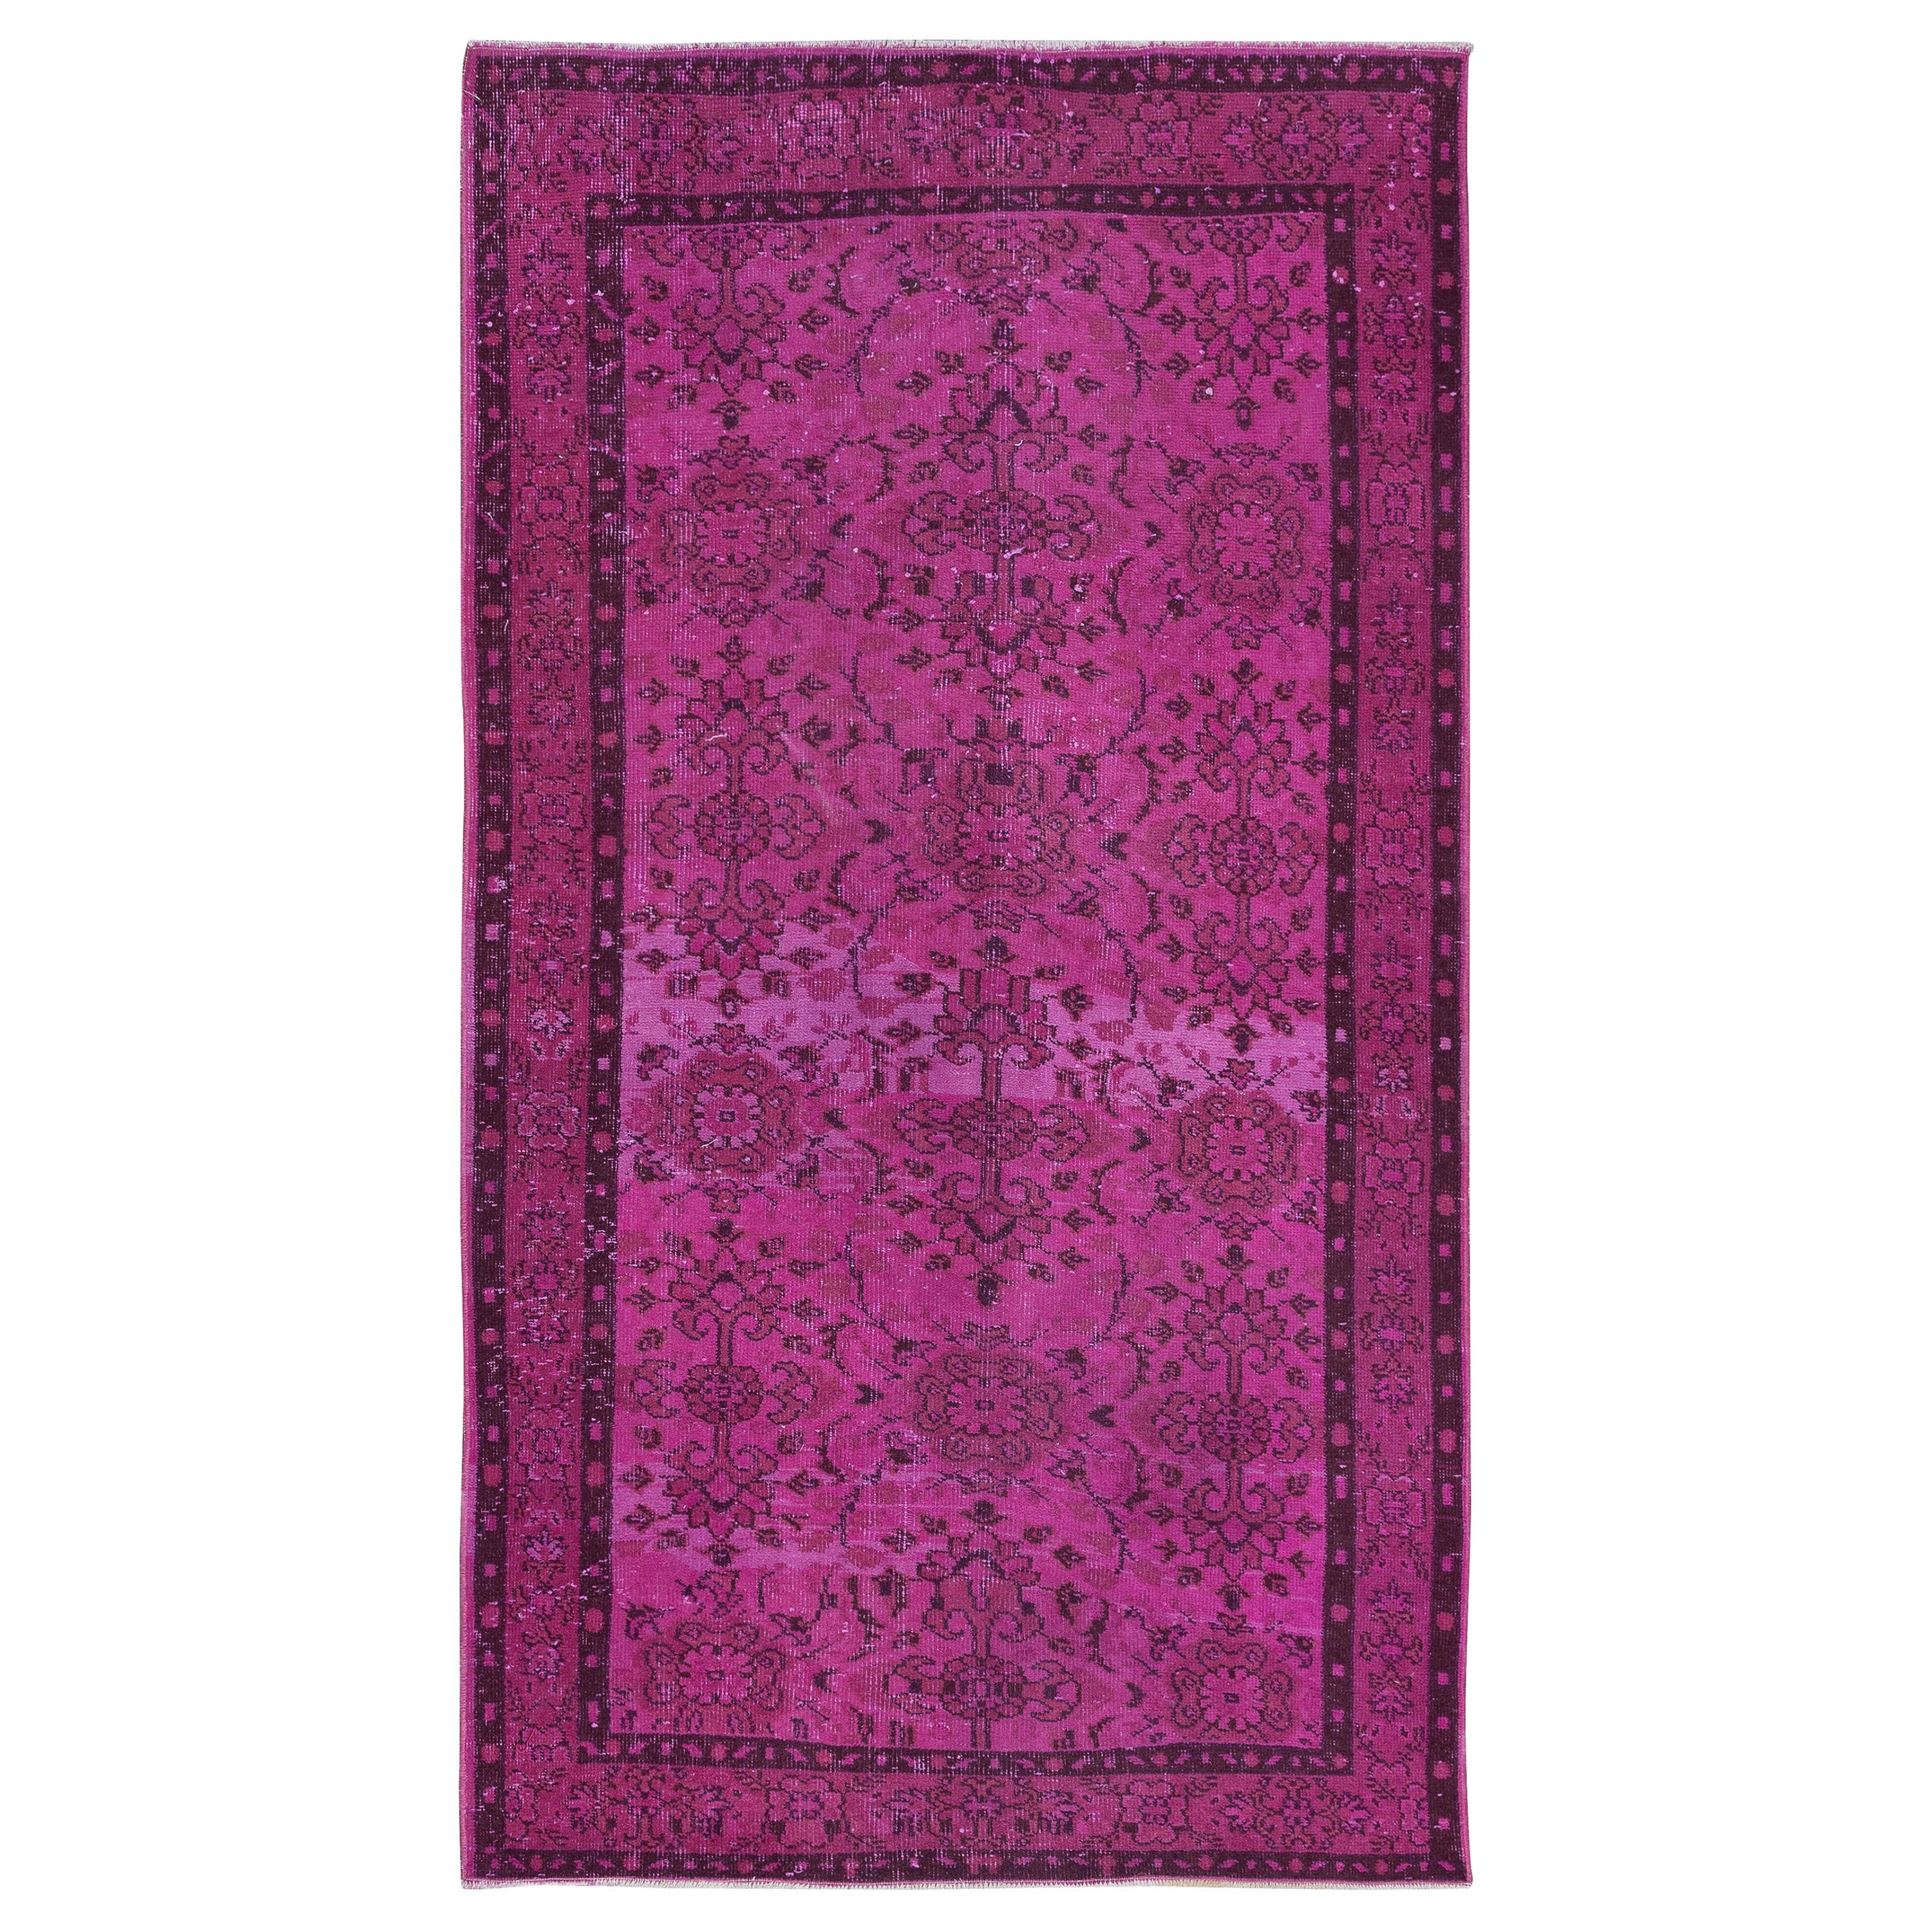 4x7 Ft Floral Patterned Pink Rug for Modern Interiors, Handknotted in Turkey For Sale